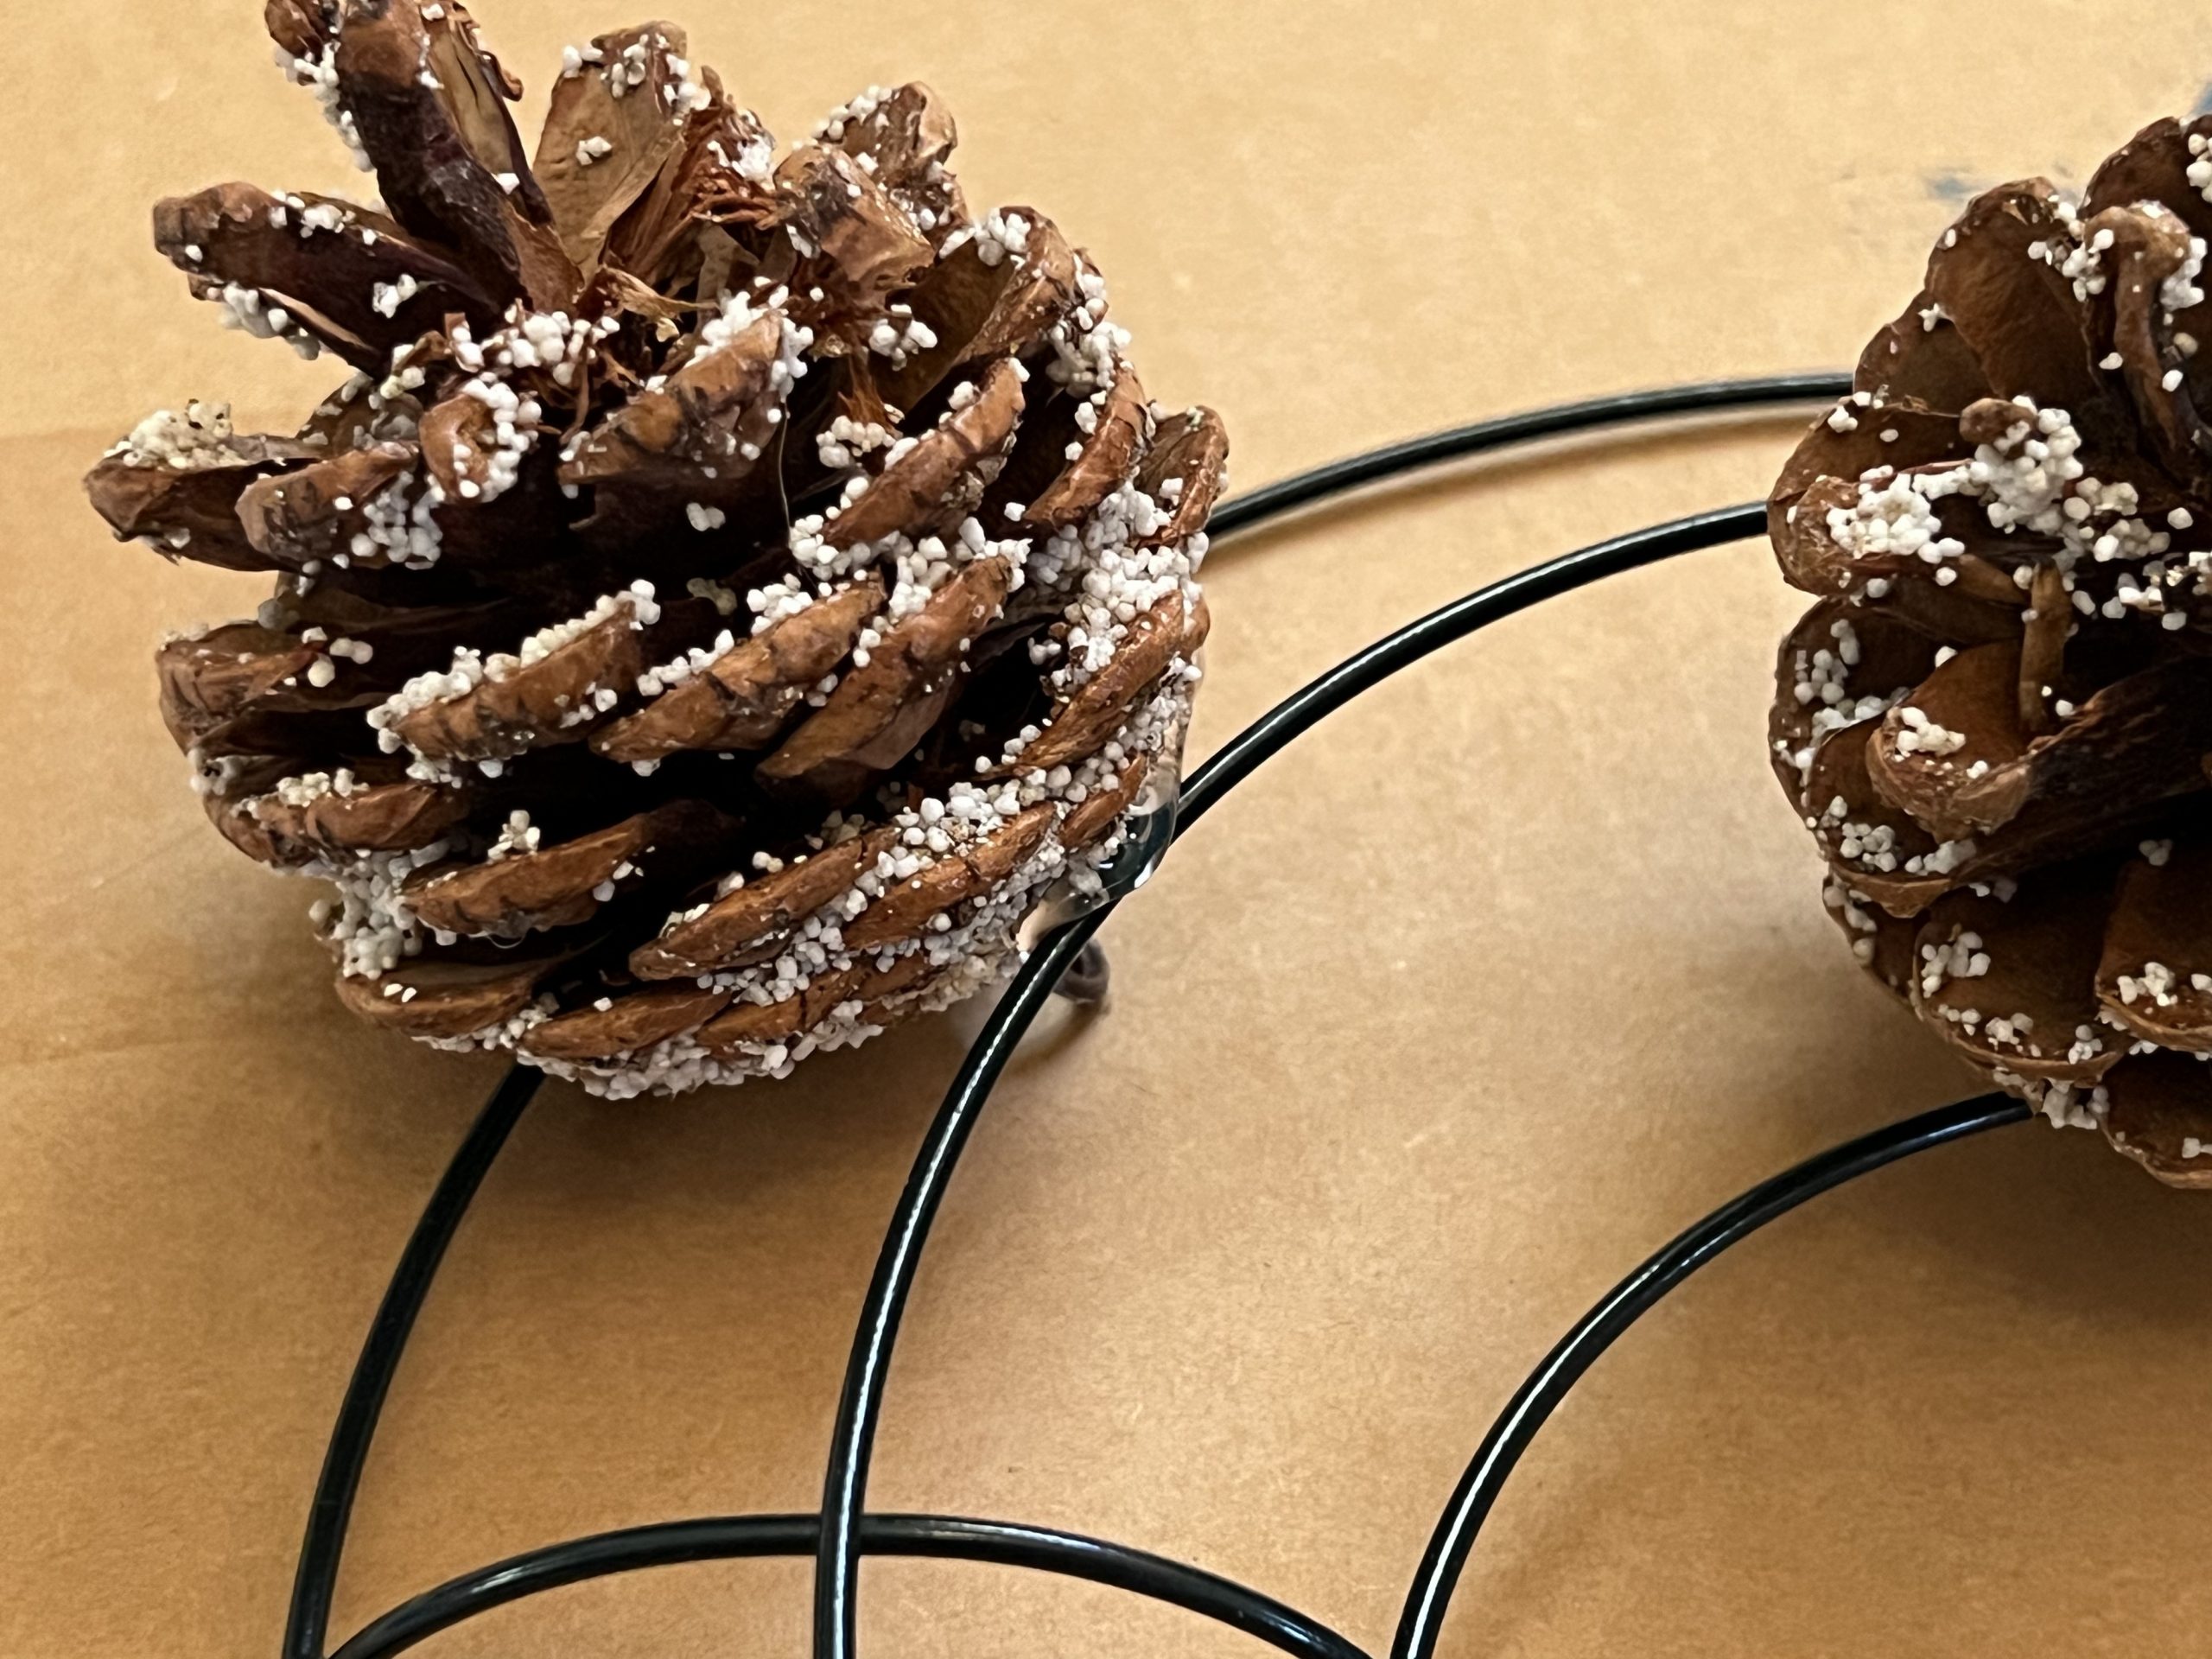 diy pinecone heart wreath - Re-Fabbed